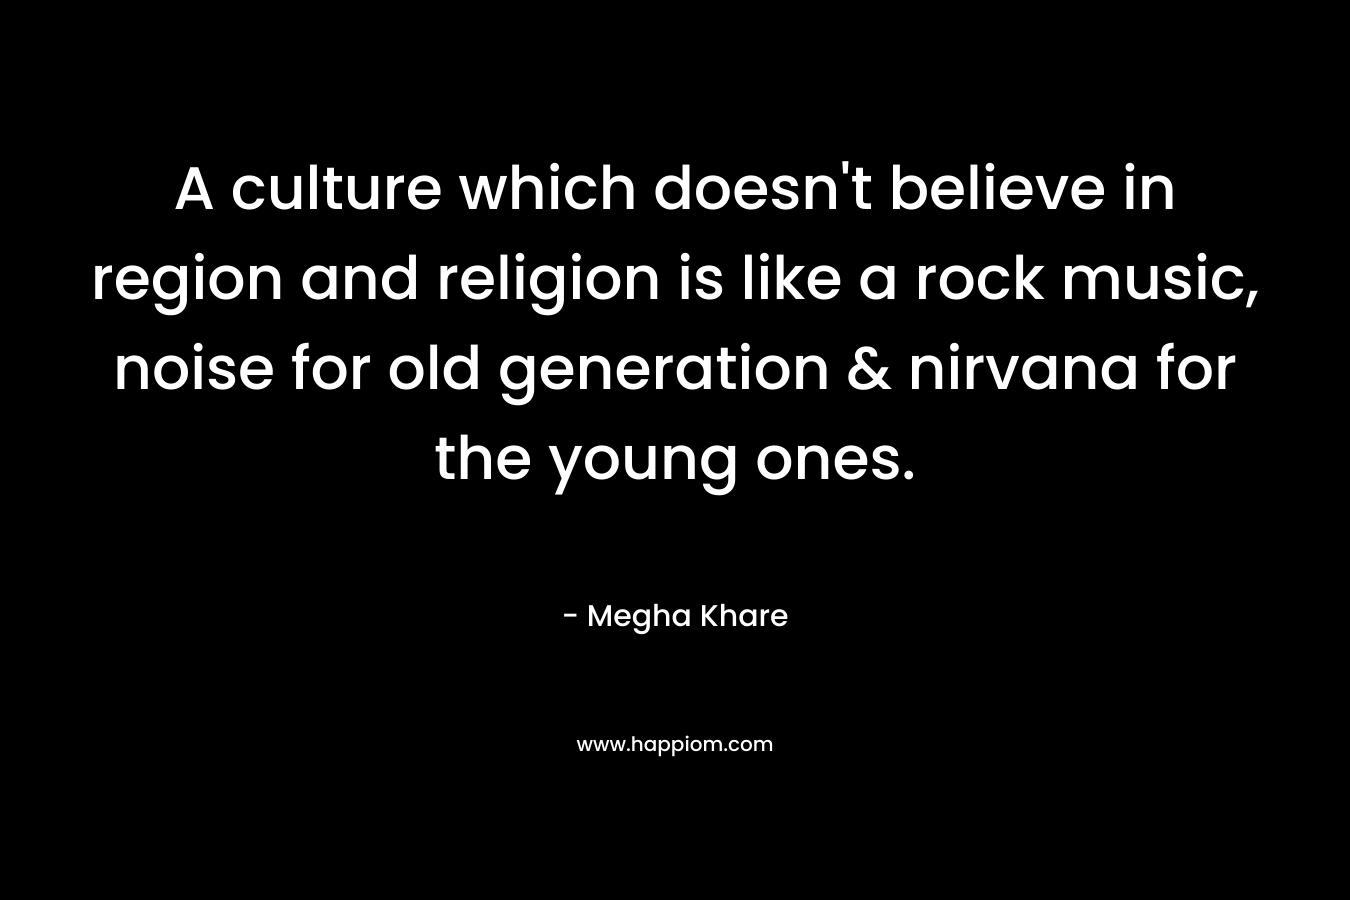 A culture which doesn’t believe in region and religion is like a rock music, noise for old generation & nirvana for the young ones. – Megha Khare